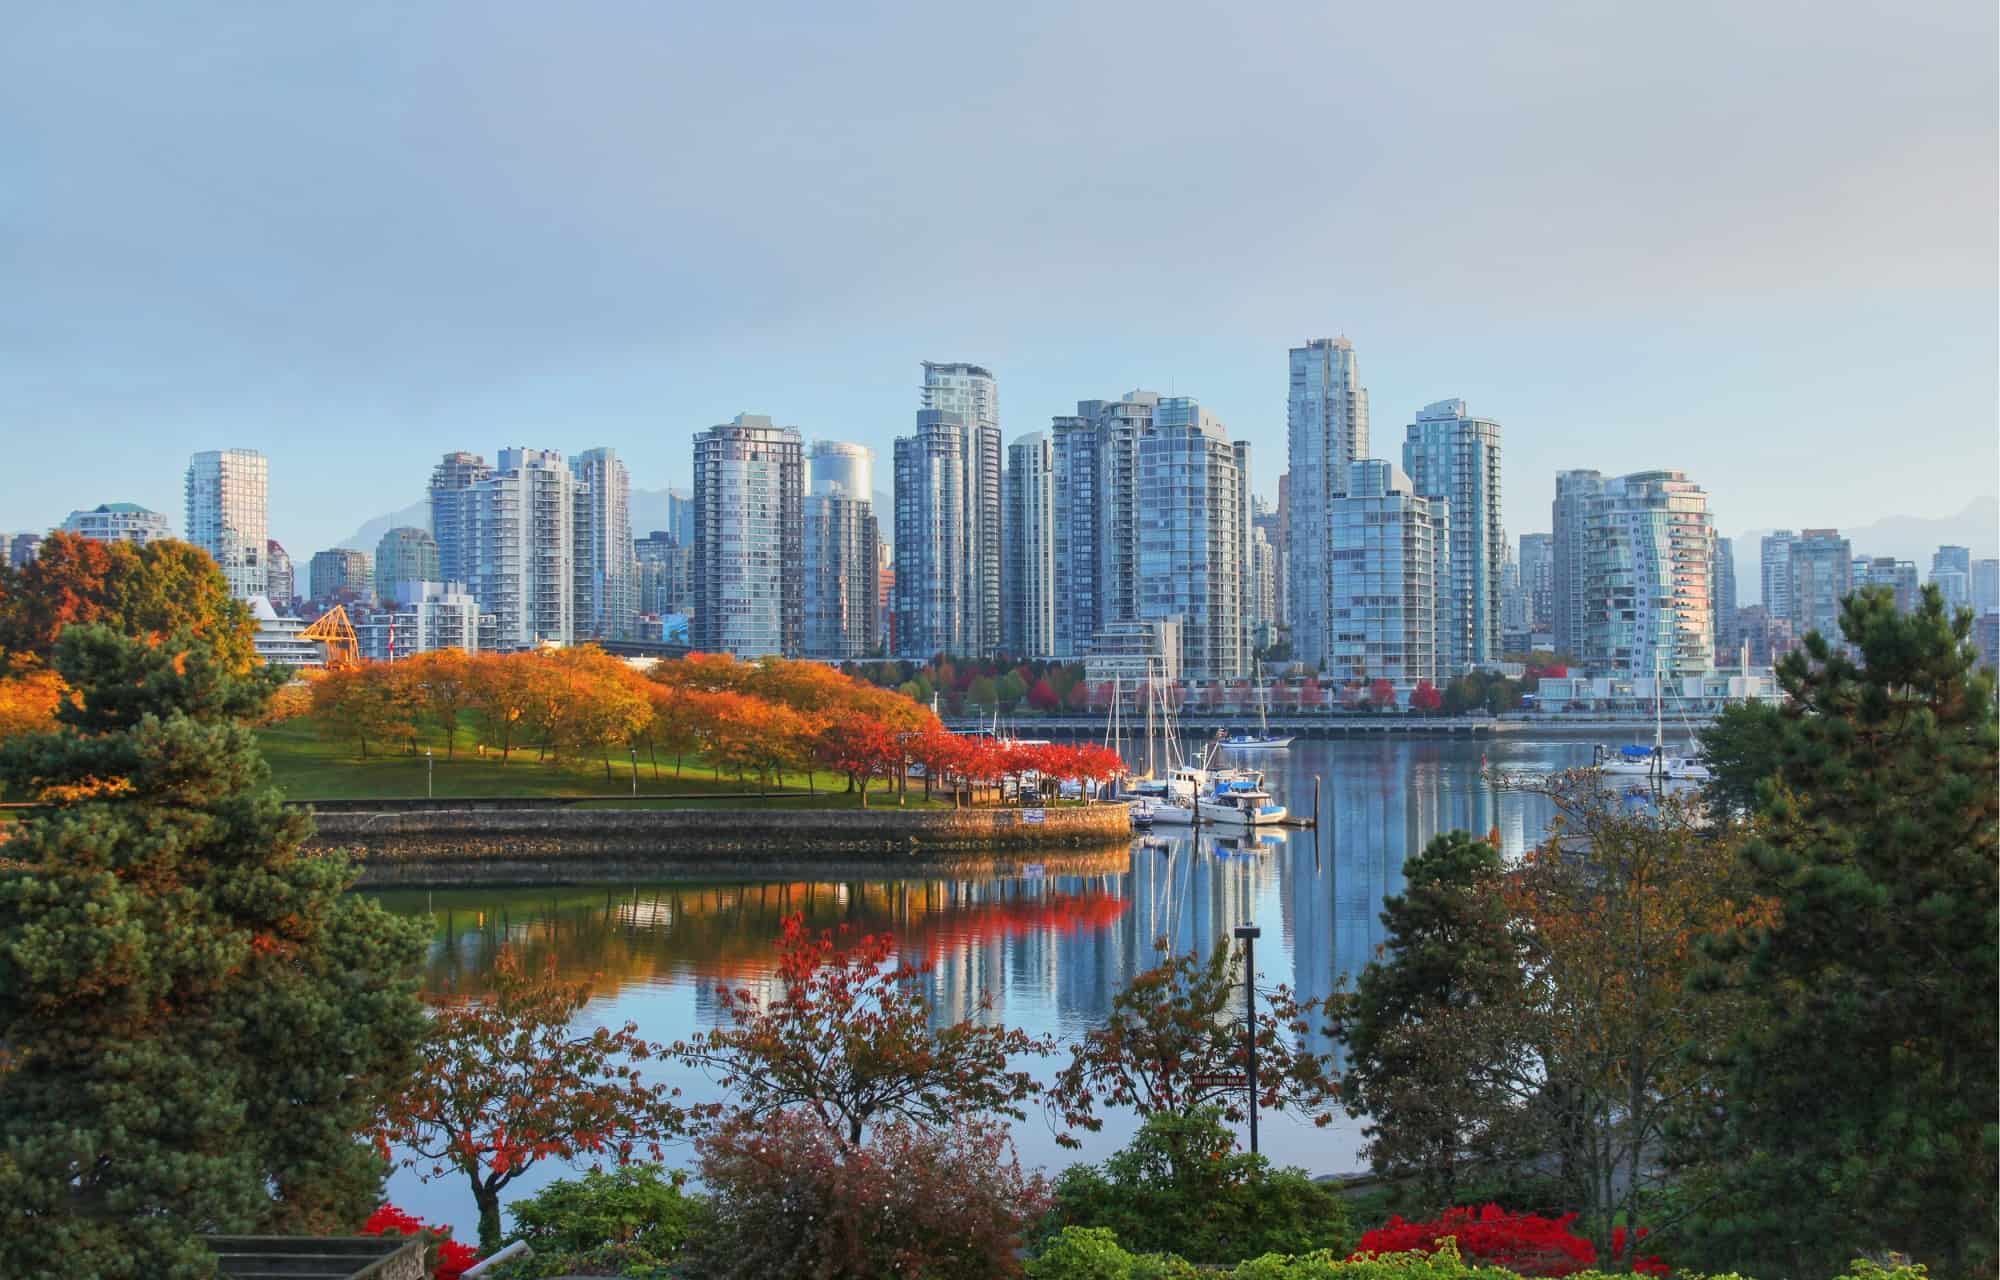 vancouver travel guide for families